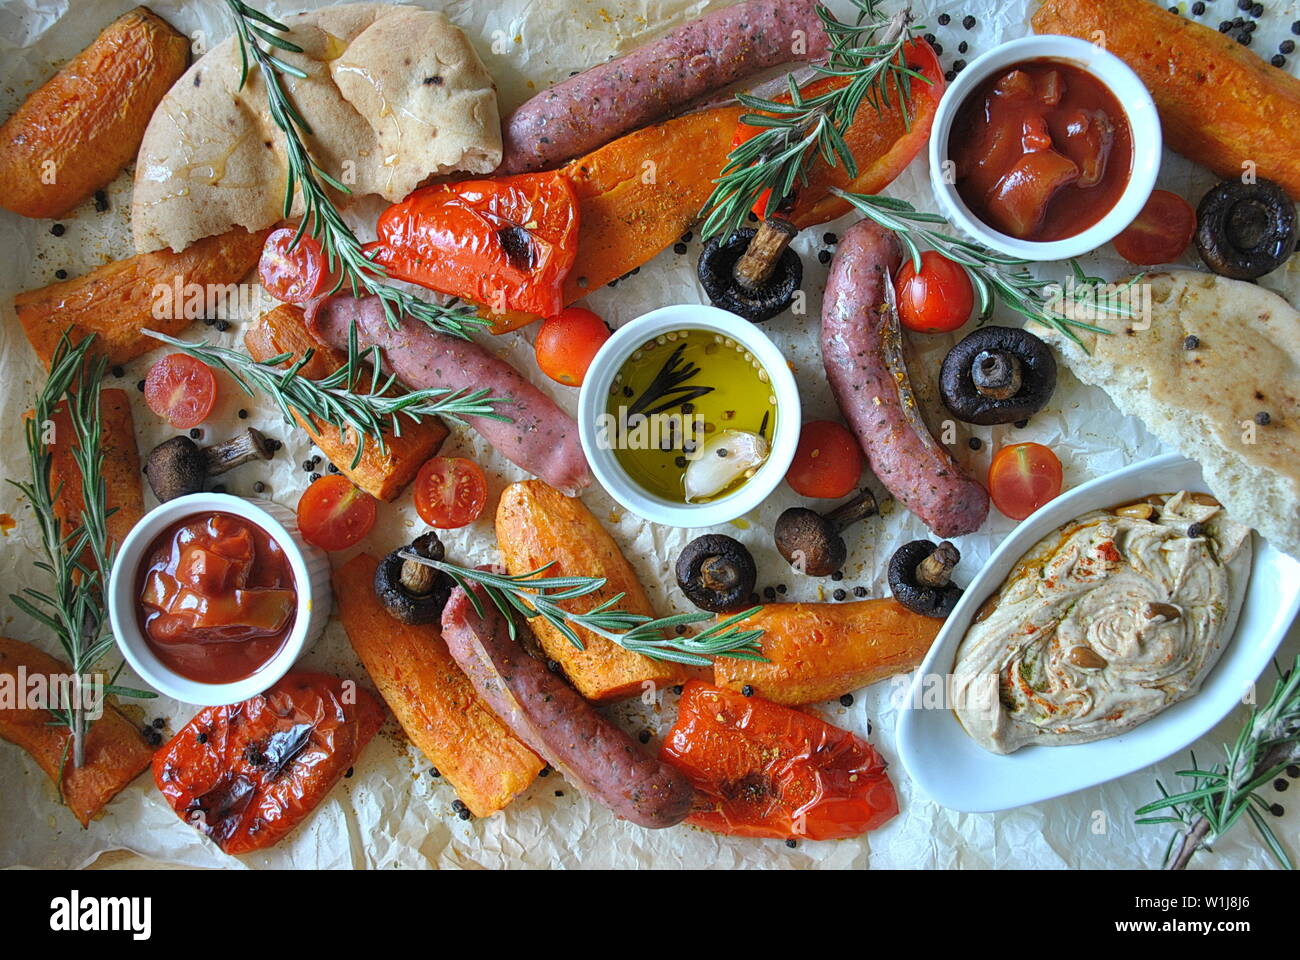 Grilled sausages and vegetables platter served with humus and pita bread, grilled mushrooms, cherry tomatoes, sweet potatoes and herbs. Barbecue grill Stock Photo